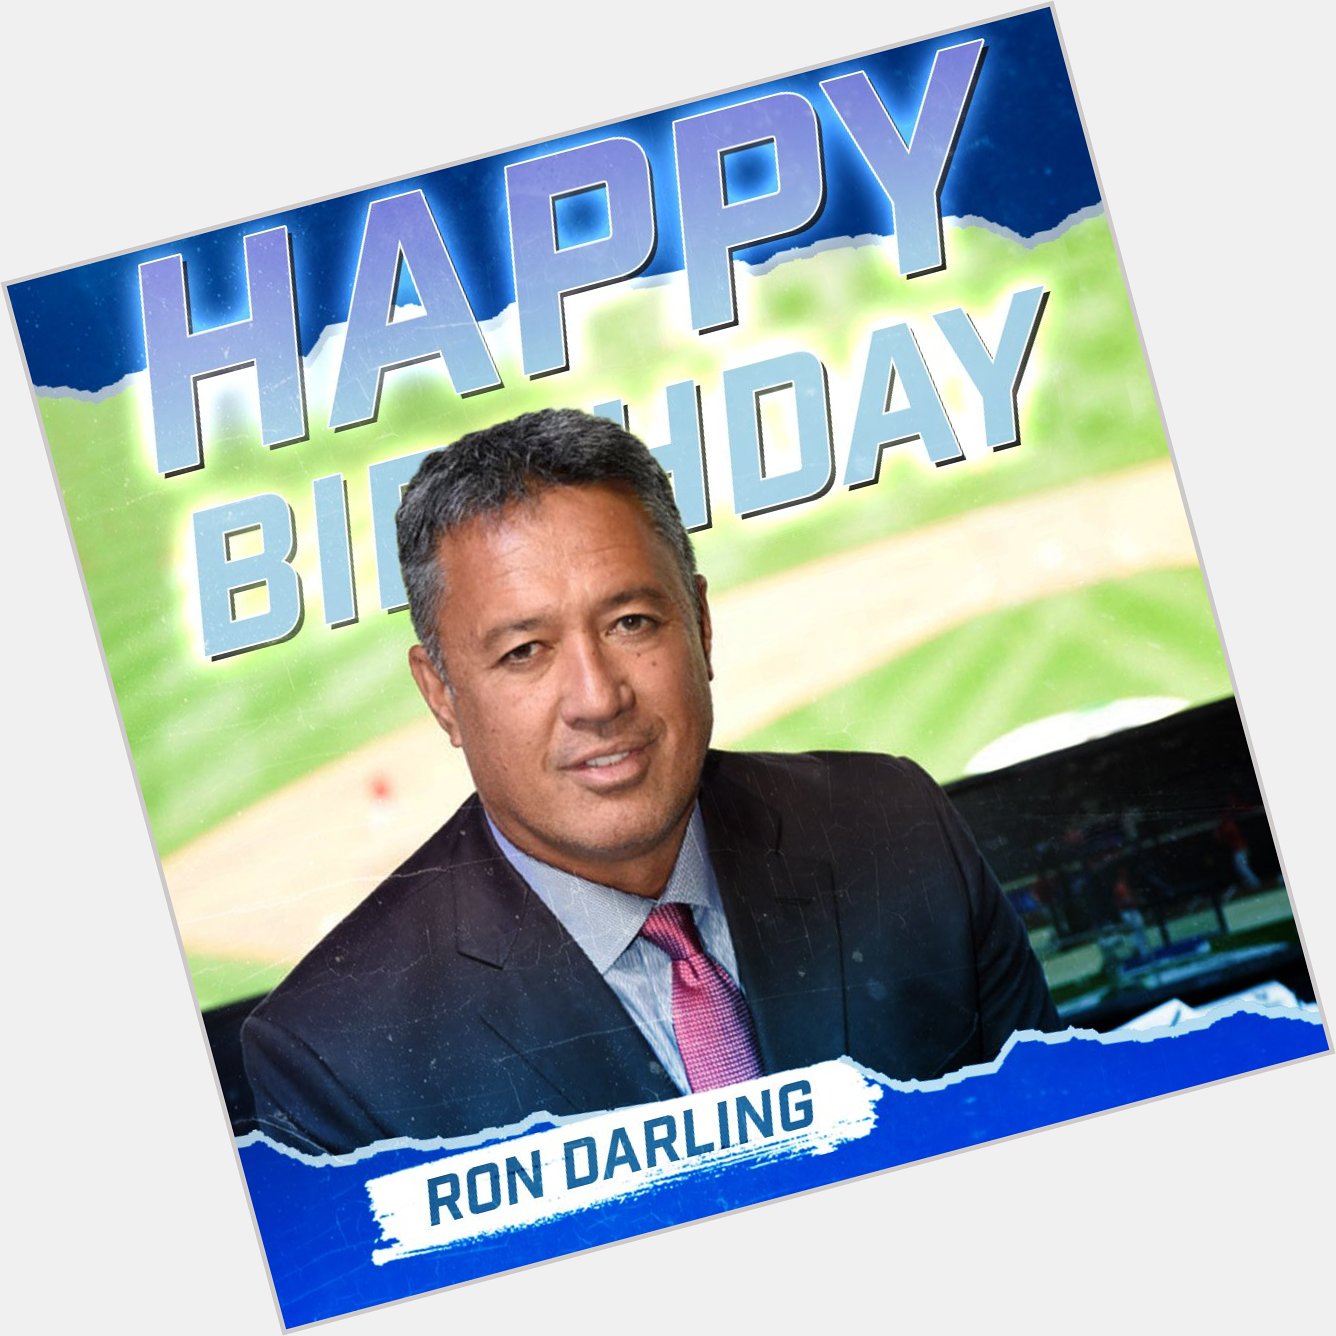 Happy Birthday to our guy, Ron Darling!  